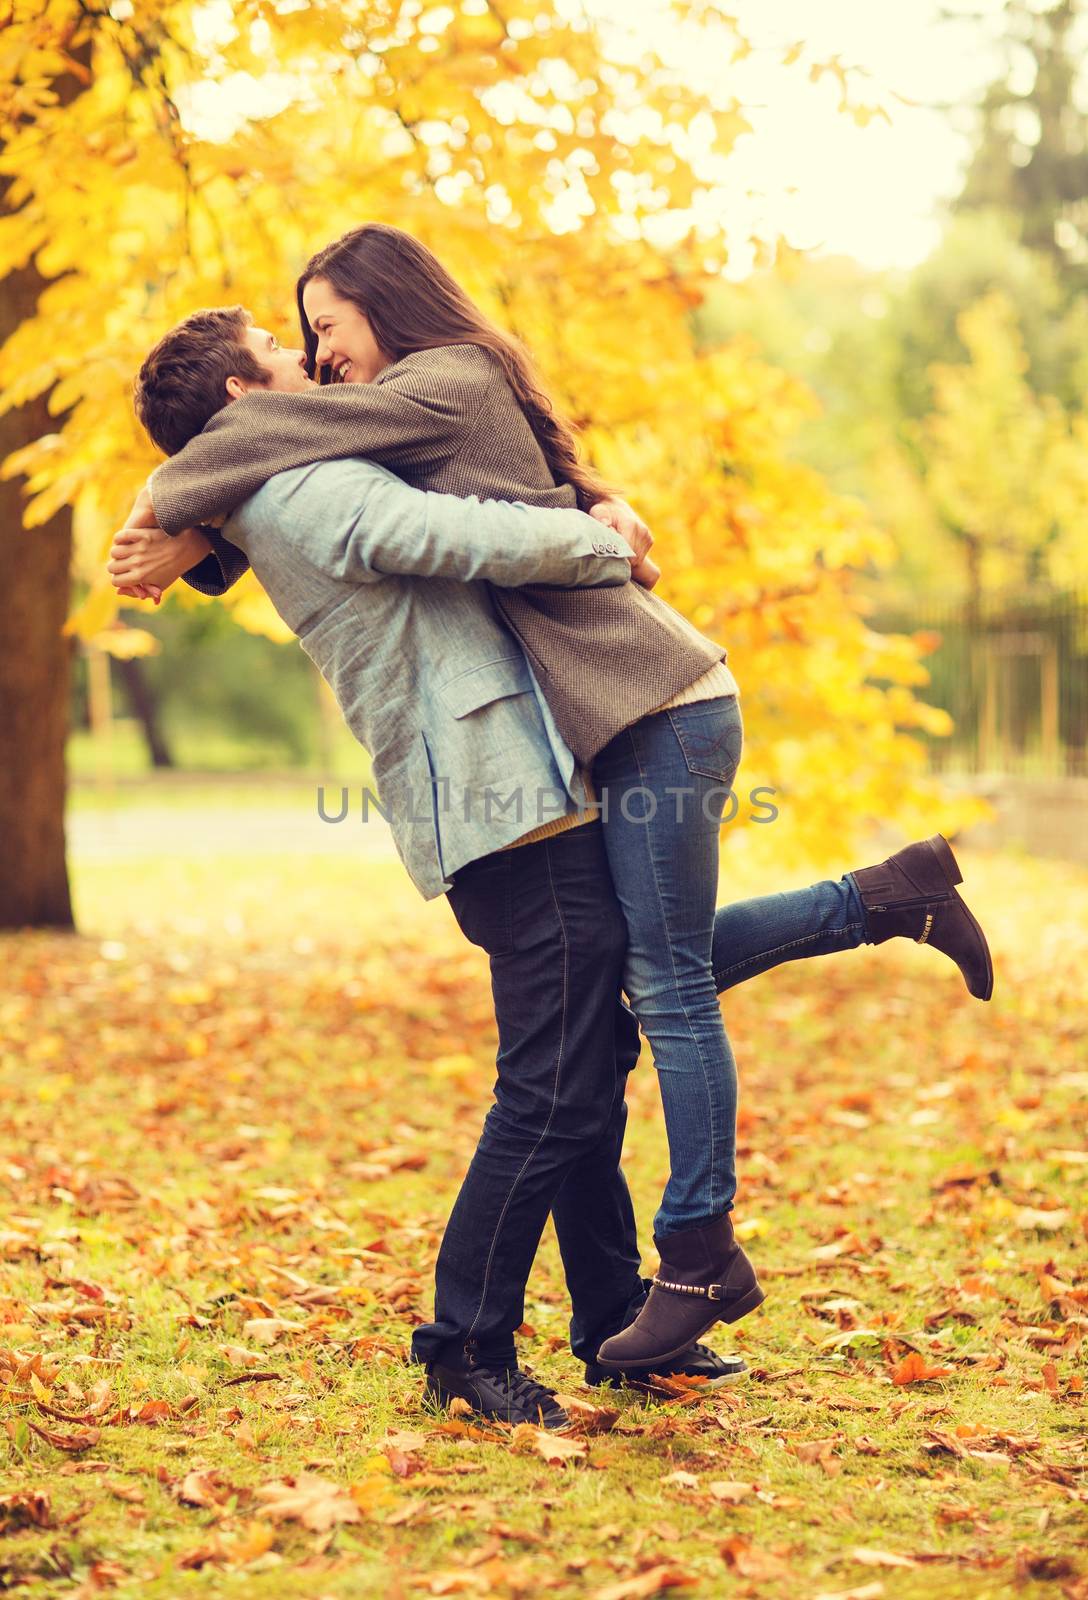 holidays, love, travel, relationship and dating concept - romantic couple playing in the autumn park